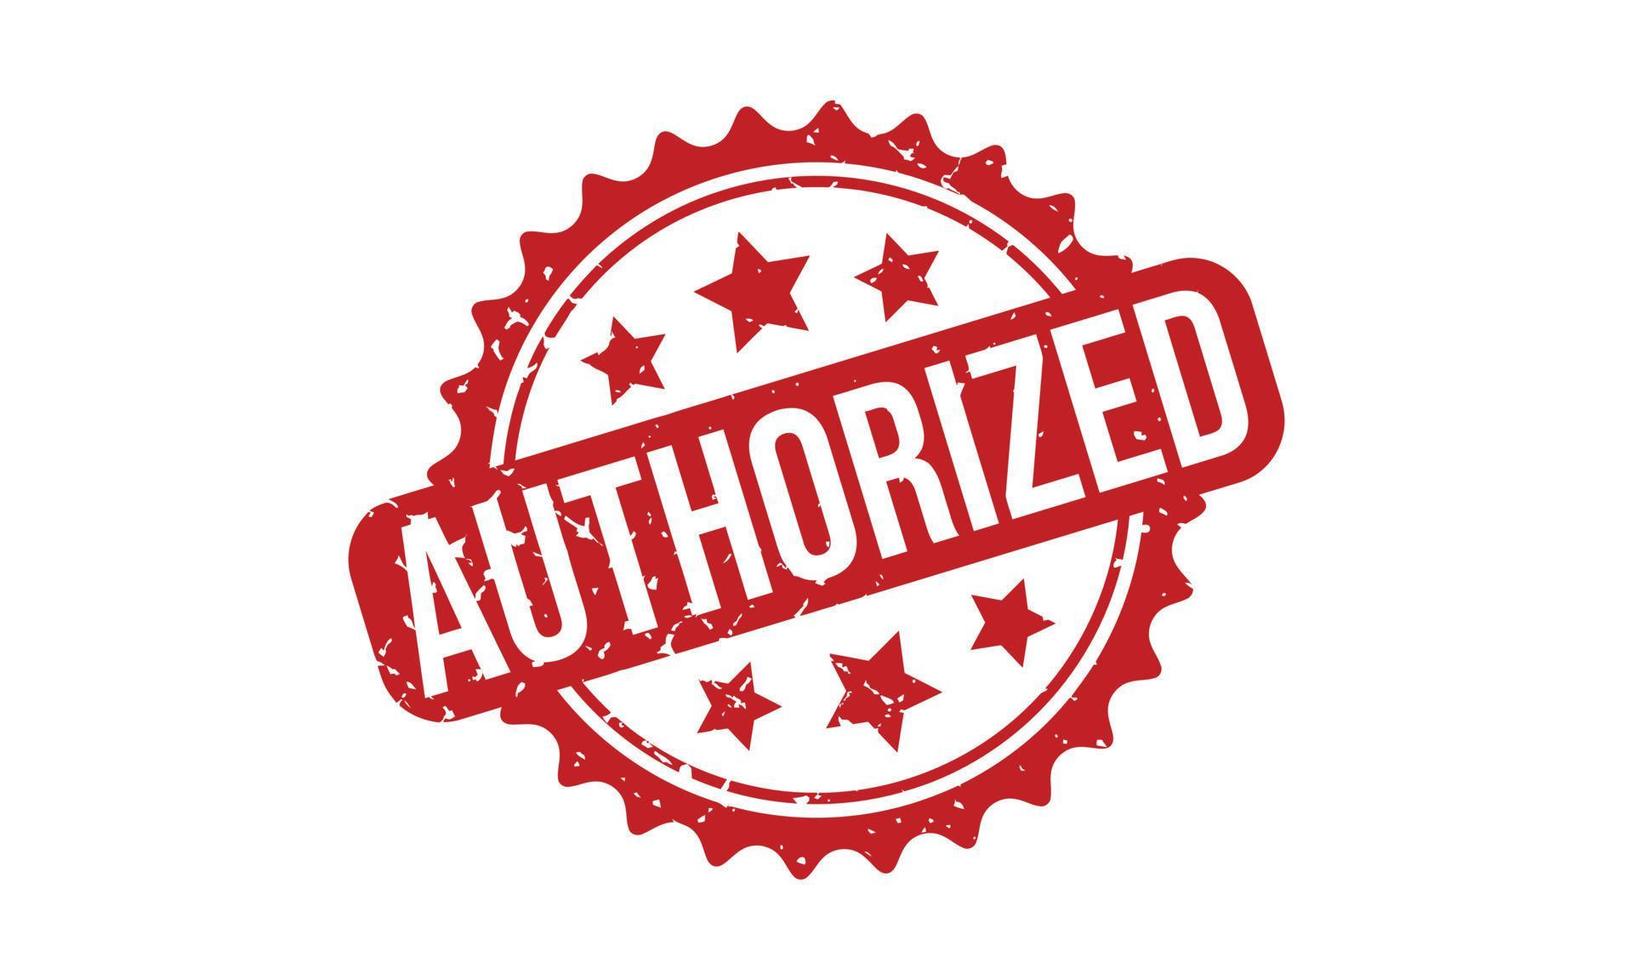 Authorized Rubber Grunge Stamp Seal Stock Vector